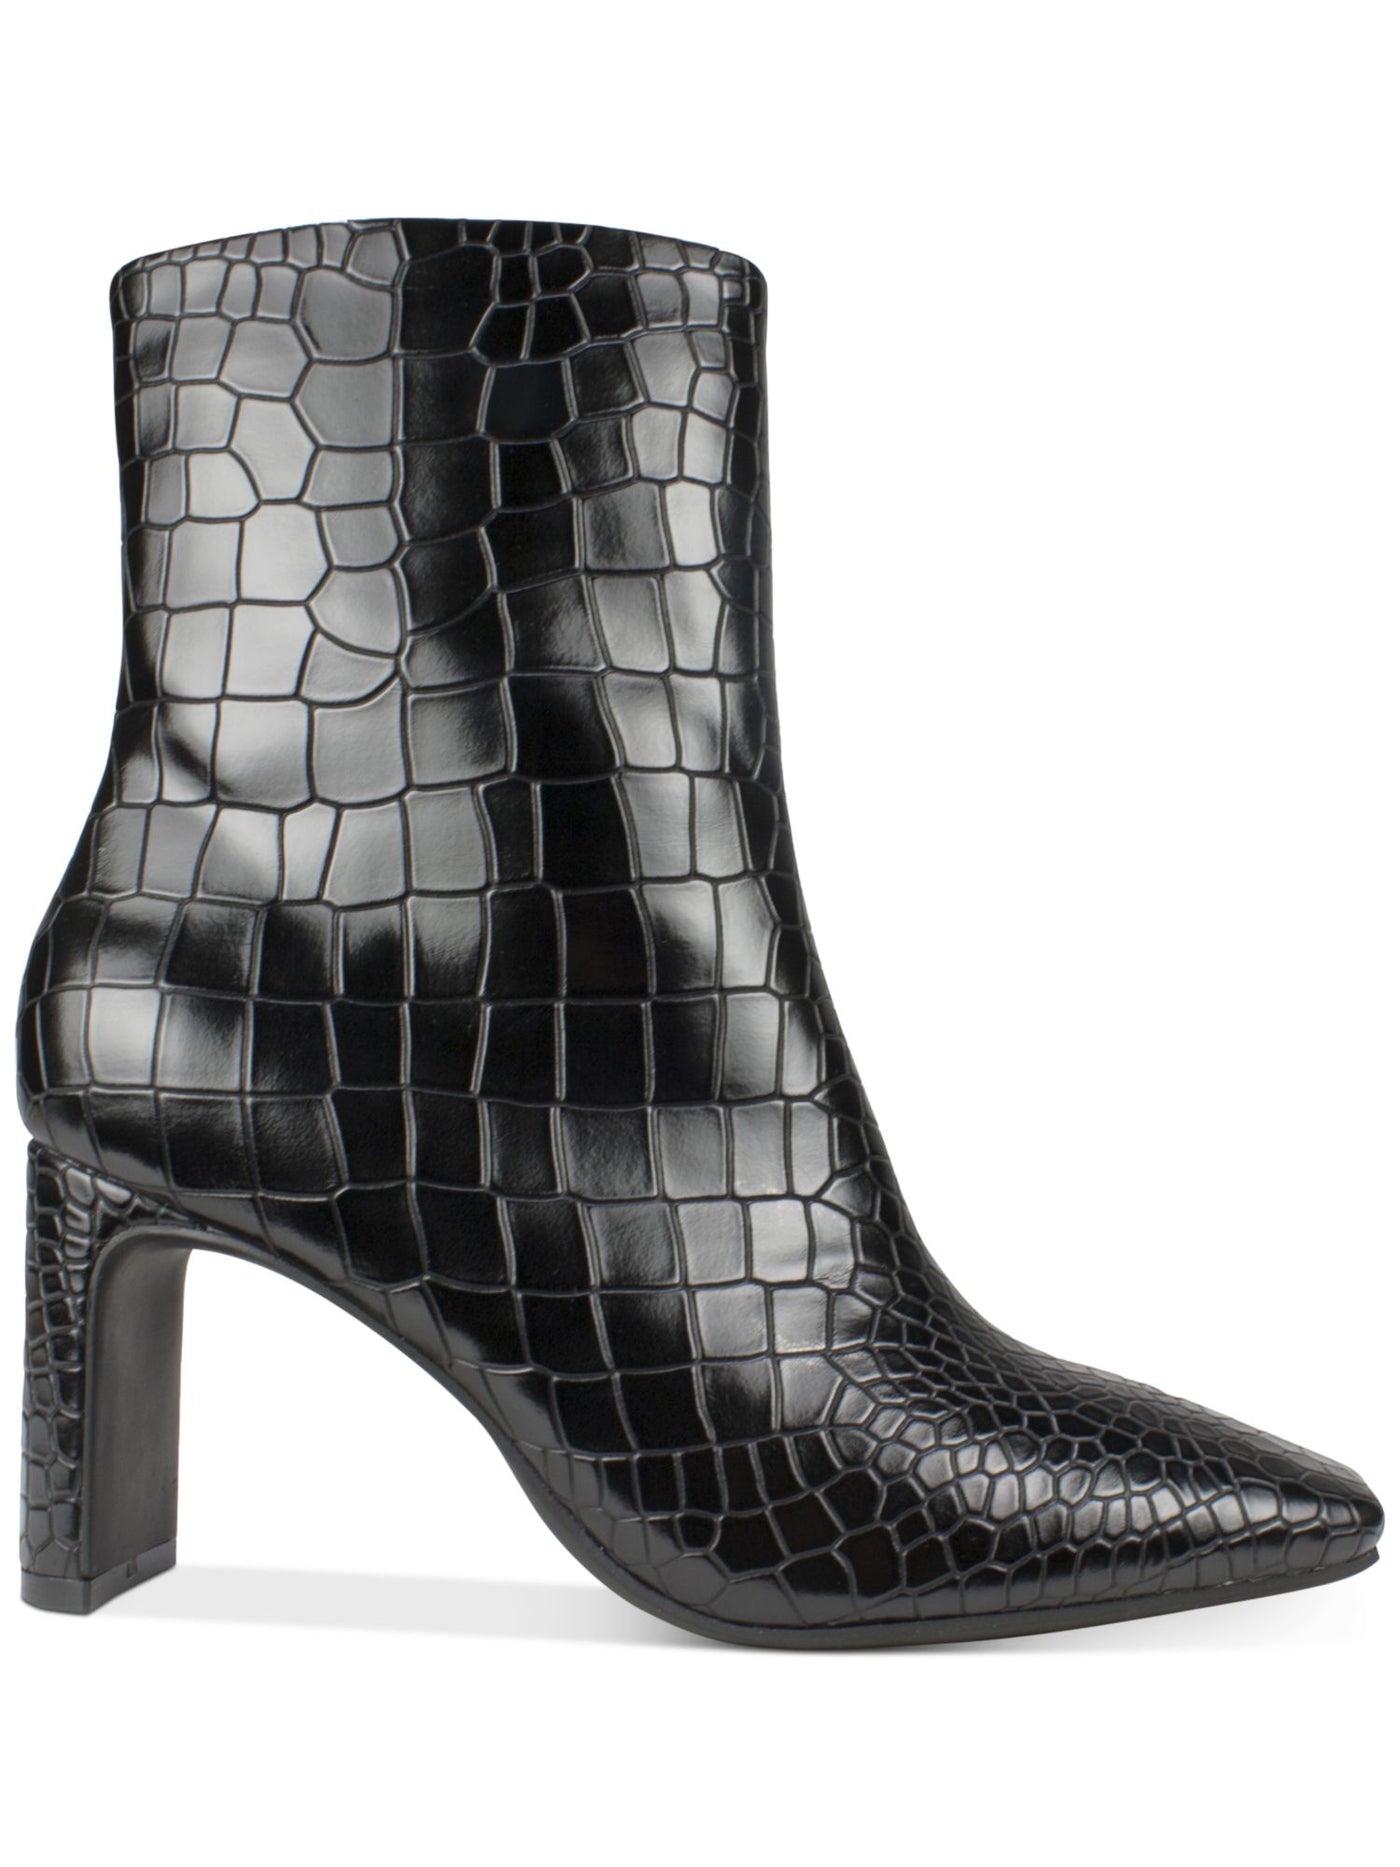 SEVEN DIALS Womens Black Croco Embossed Cushioned Nicole Square Toe Sculpted Heel Zip-Up Dress Booties 9.5 M